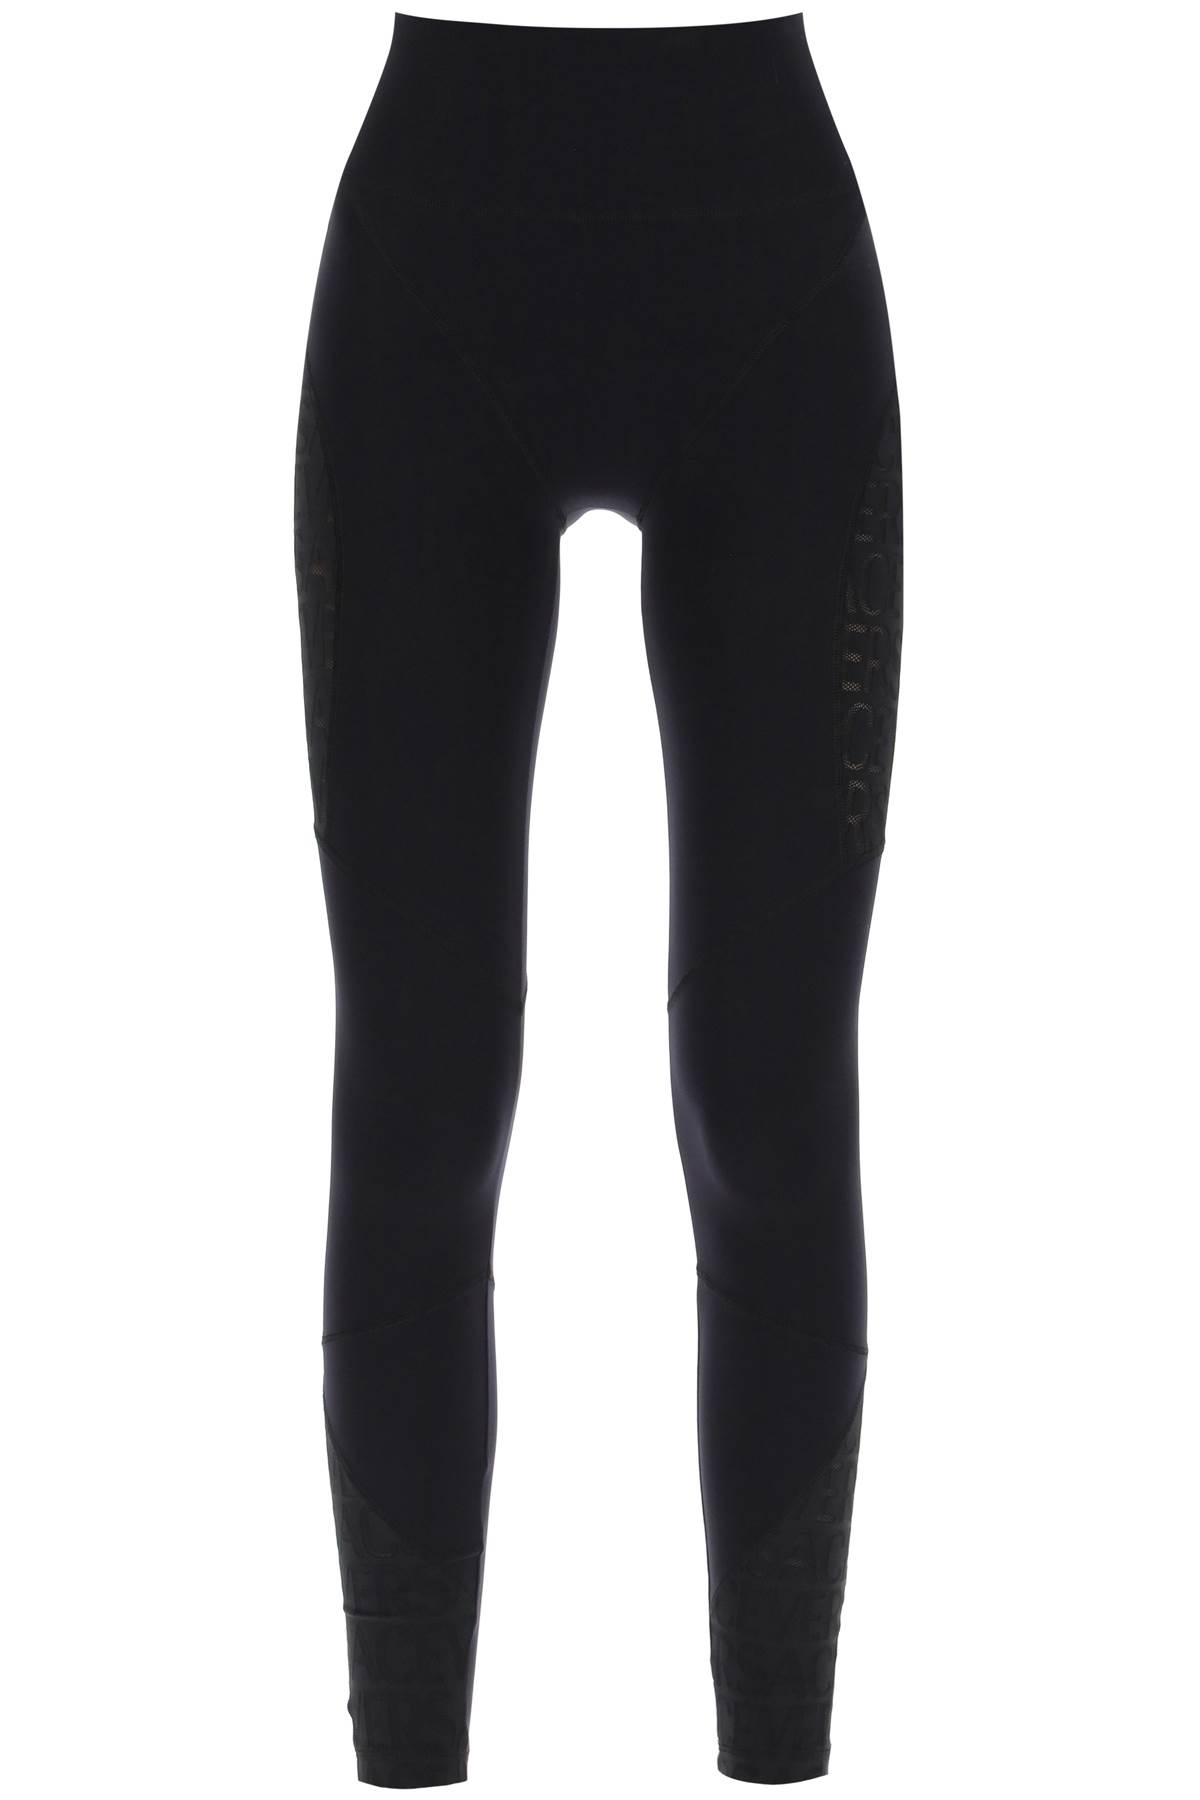 Sports Leggings With Lettering